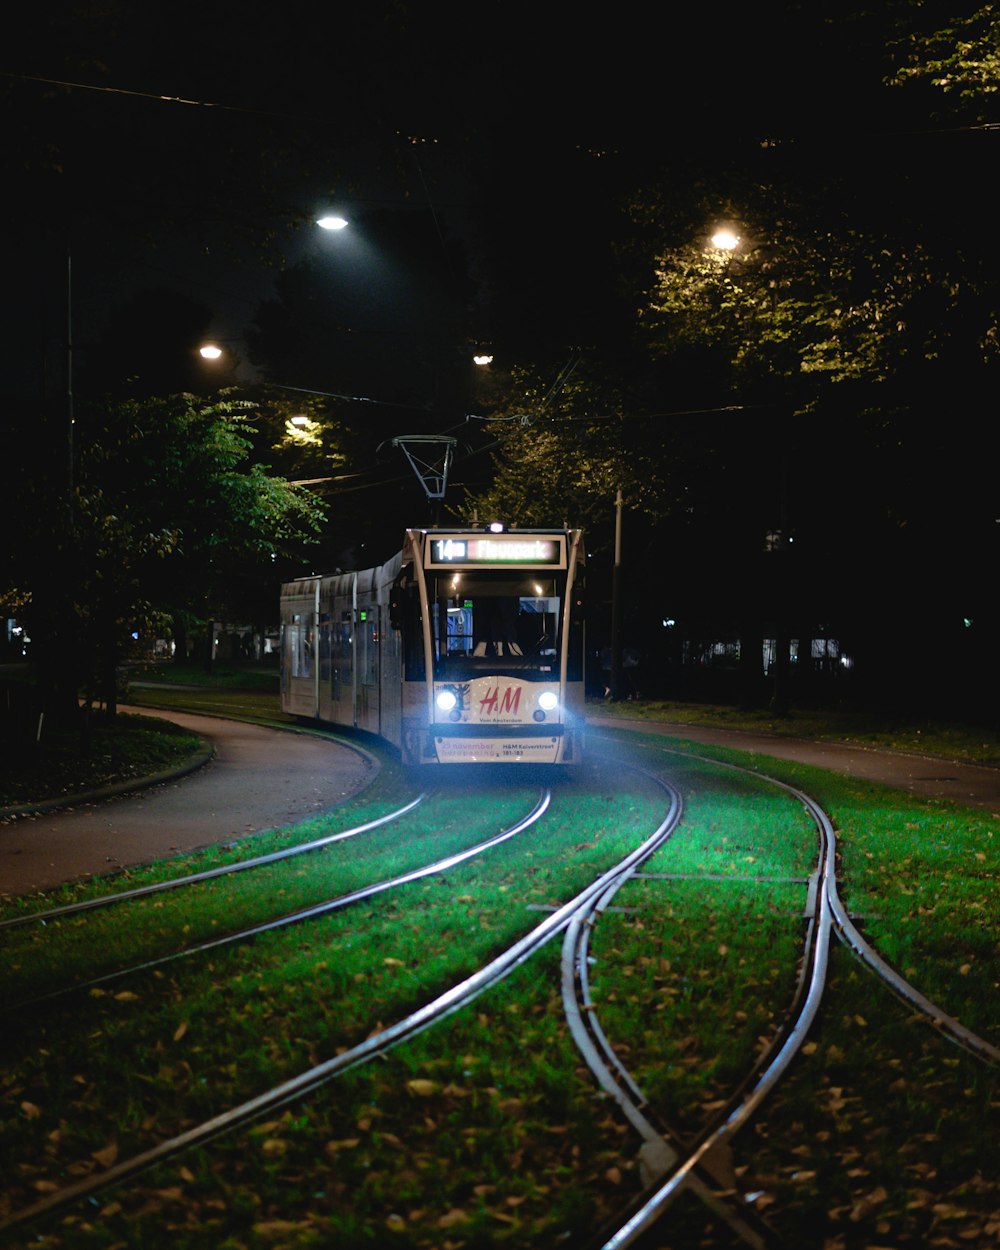 a trolley car traveling down the tracks at night